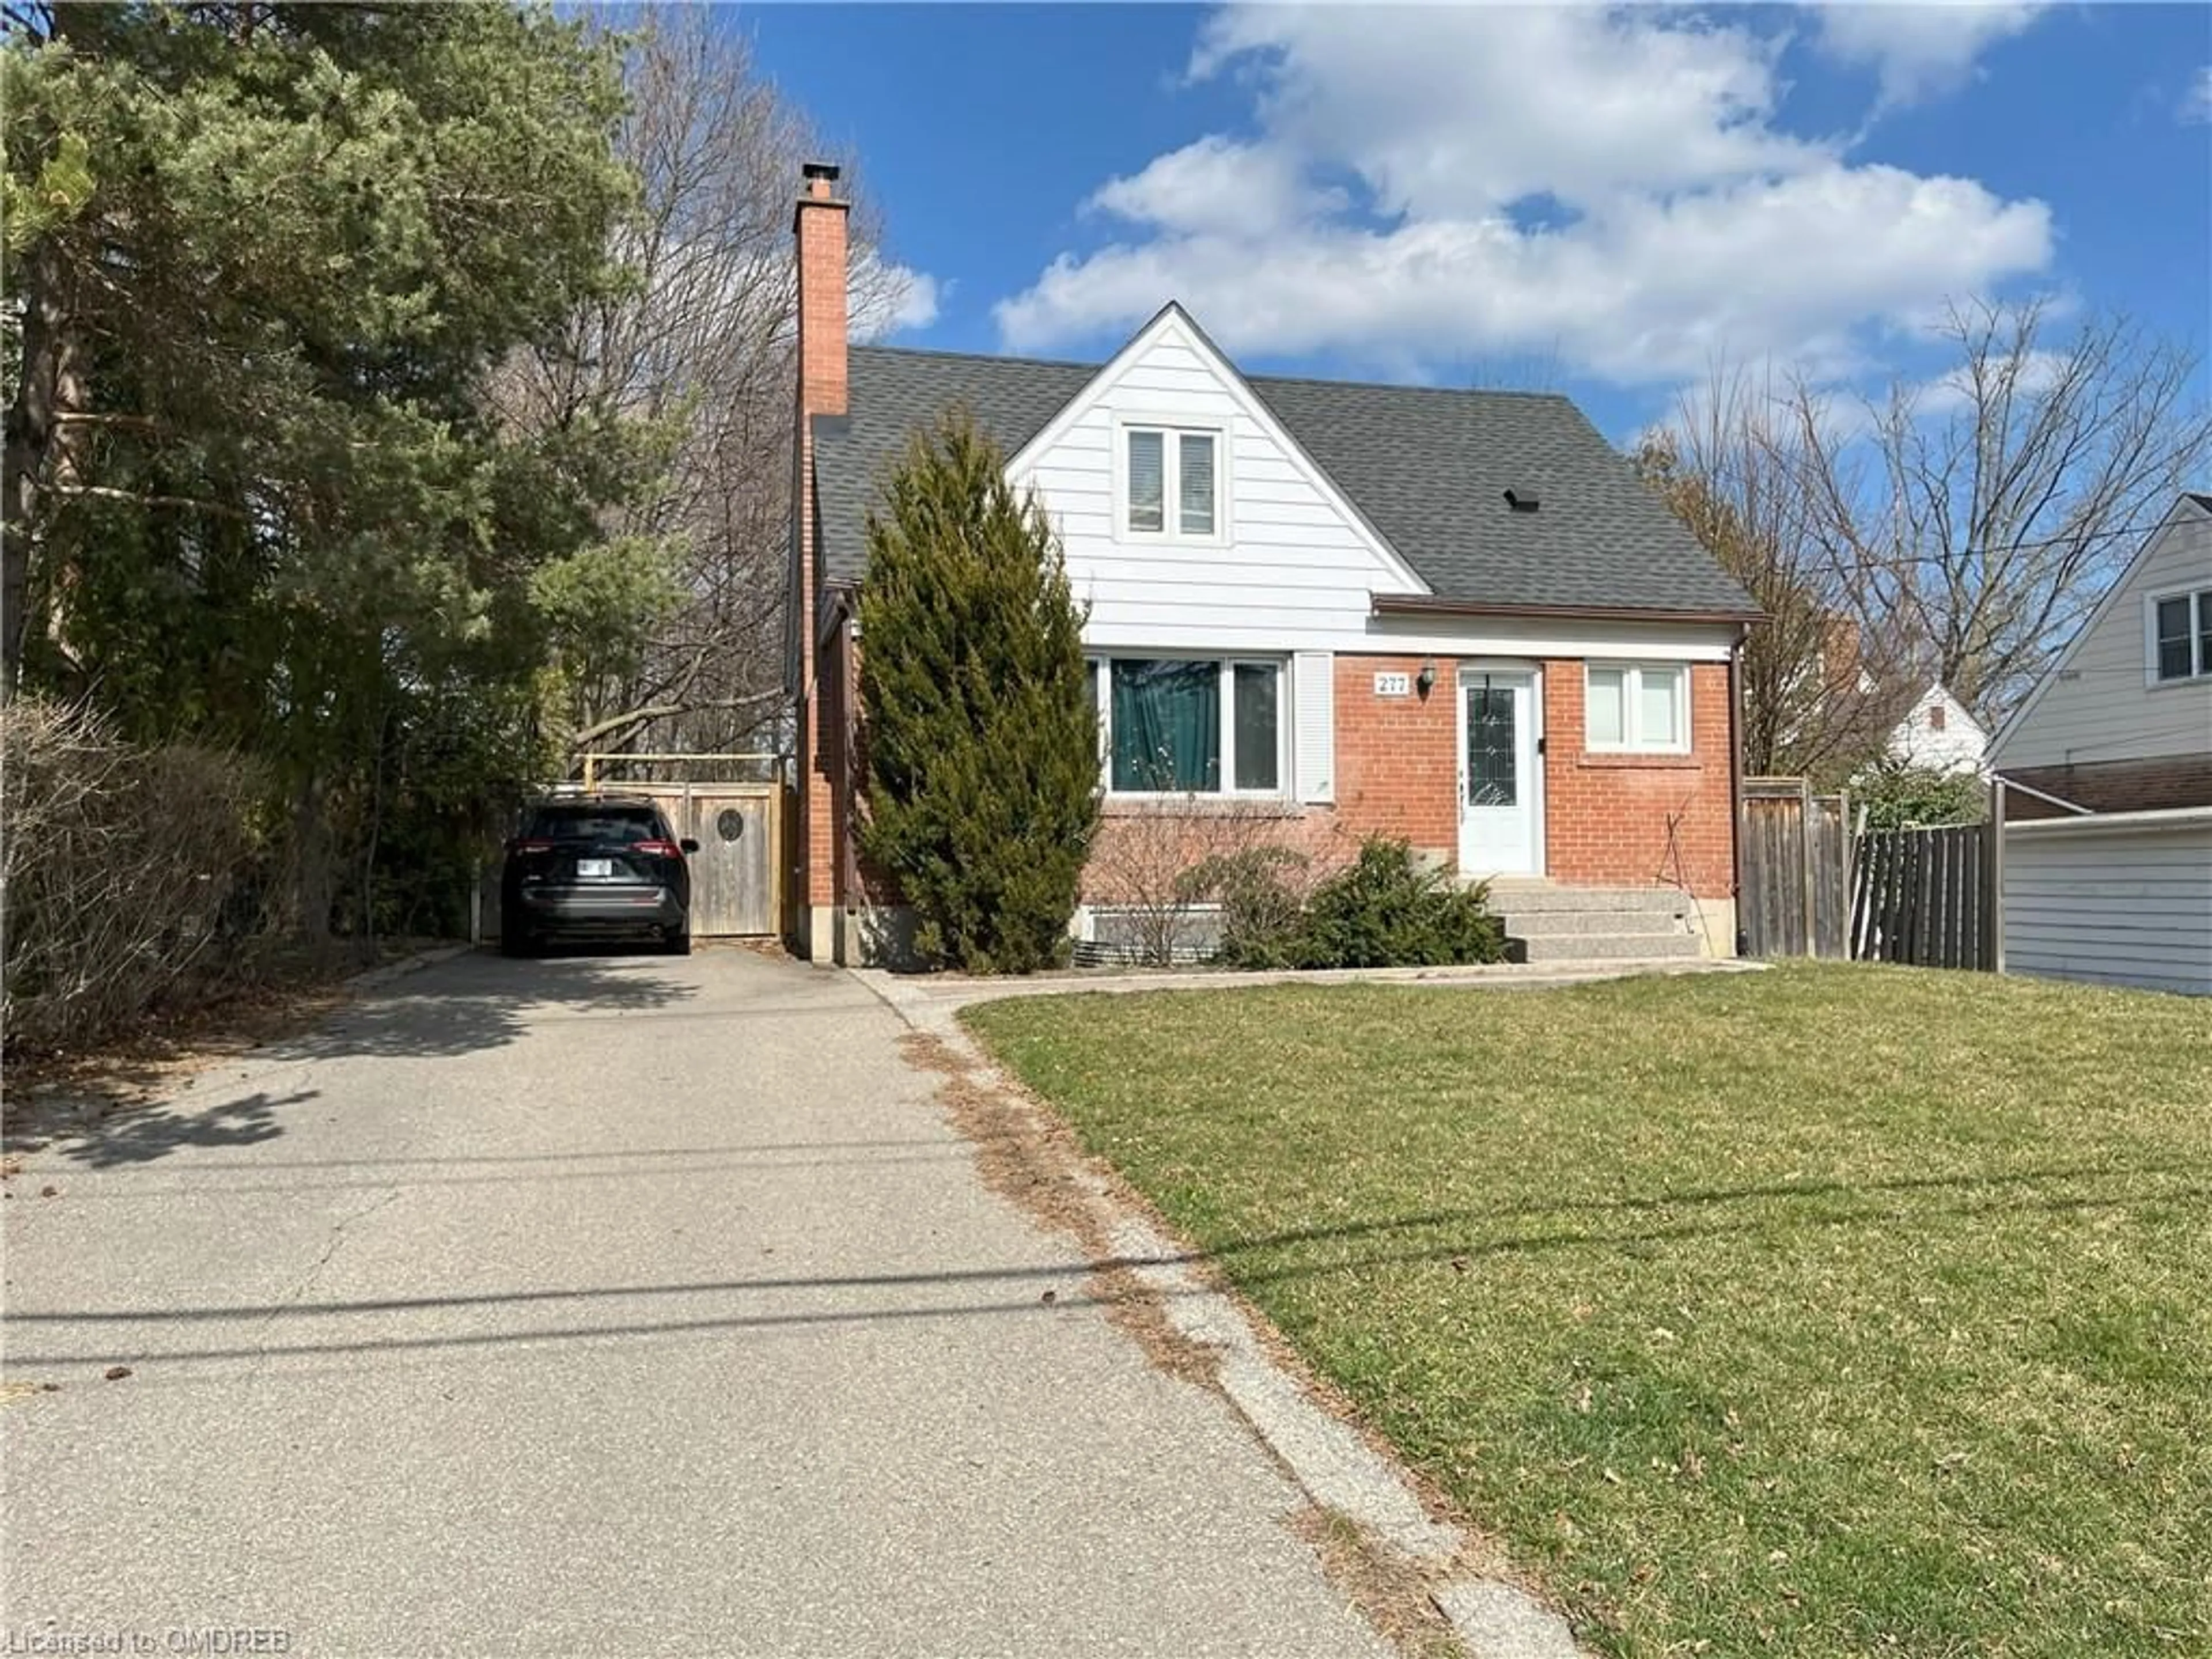 Frontside or backside of a home for 277 Queen Mary Dr, Oakville Ontario L6K 3L4